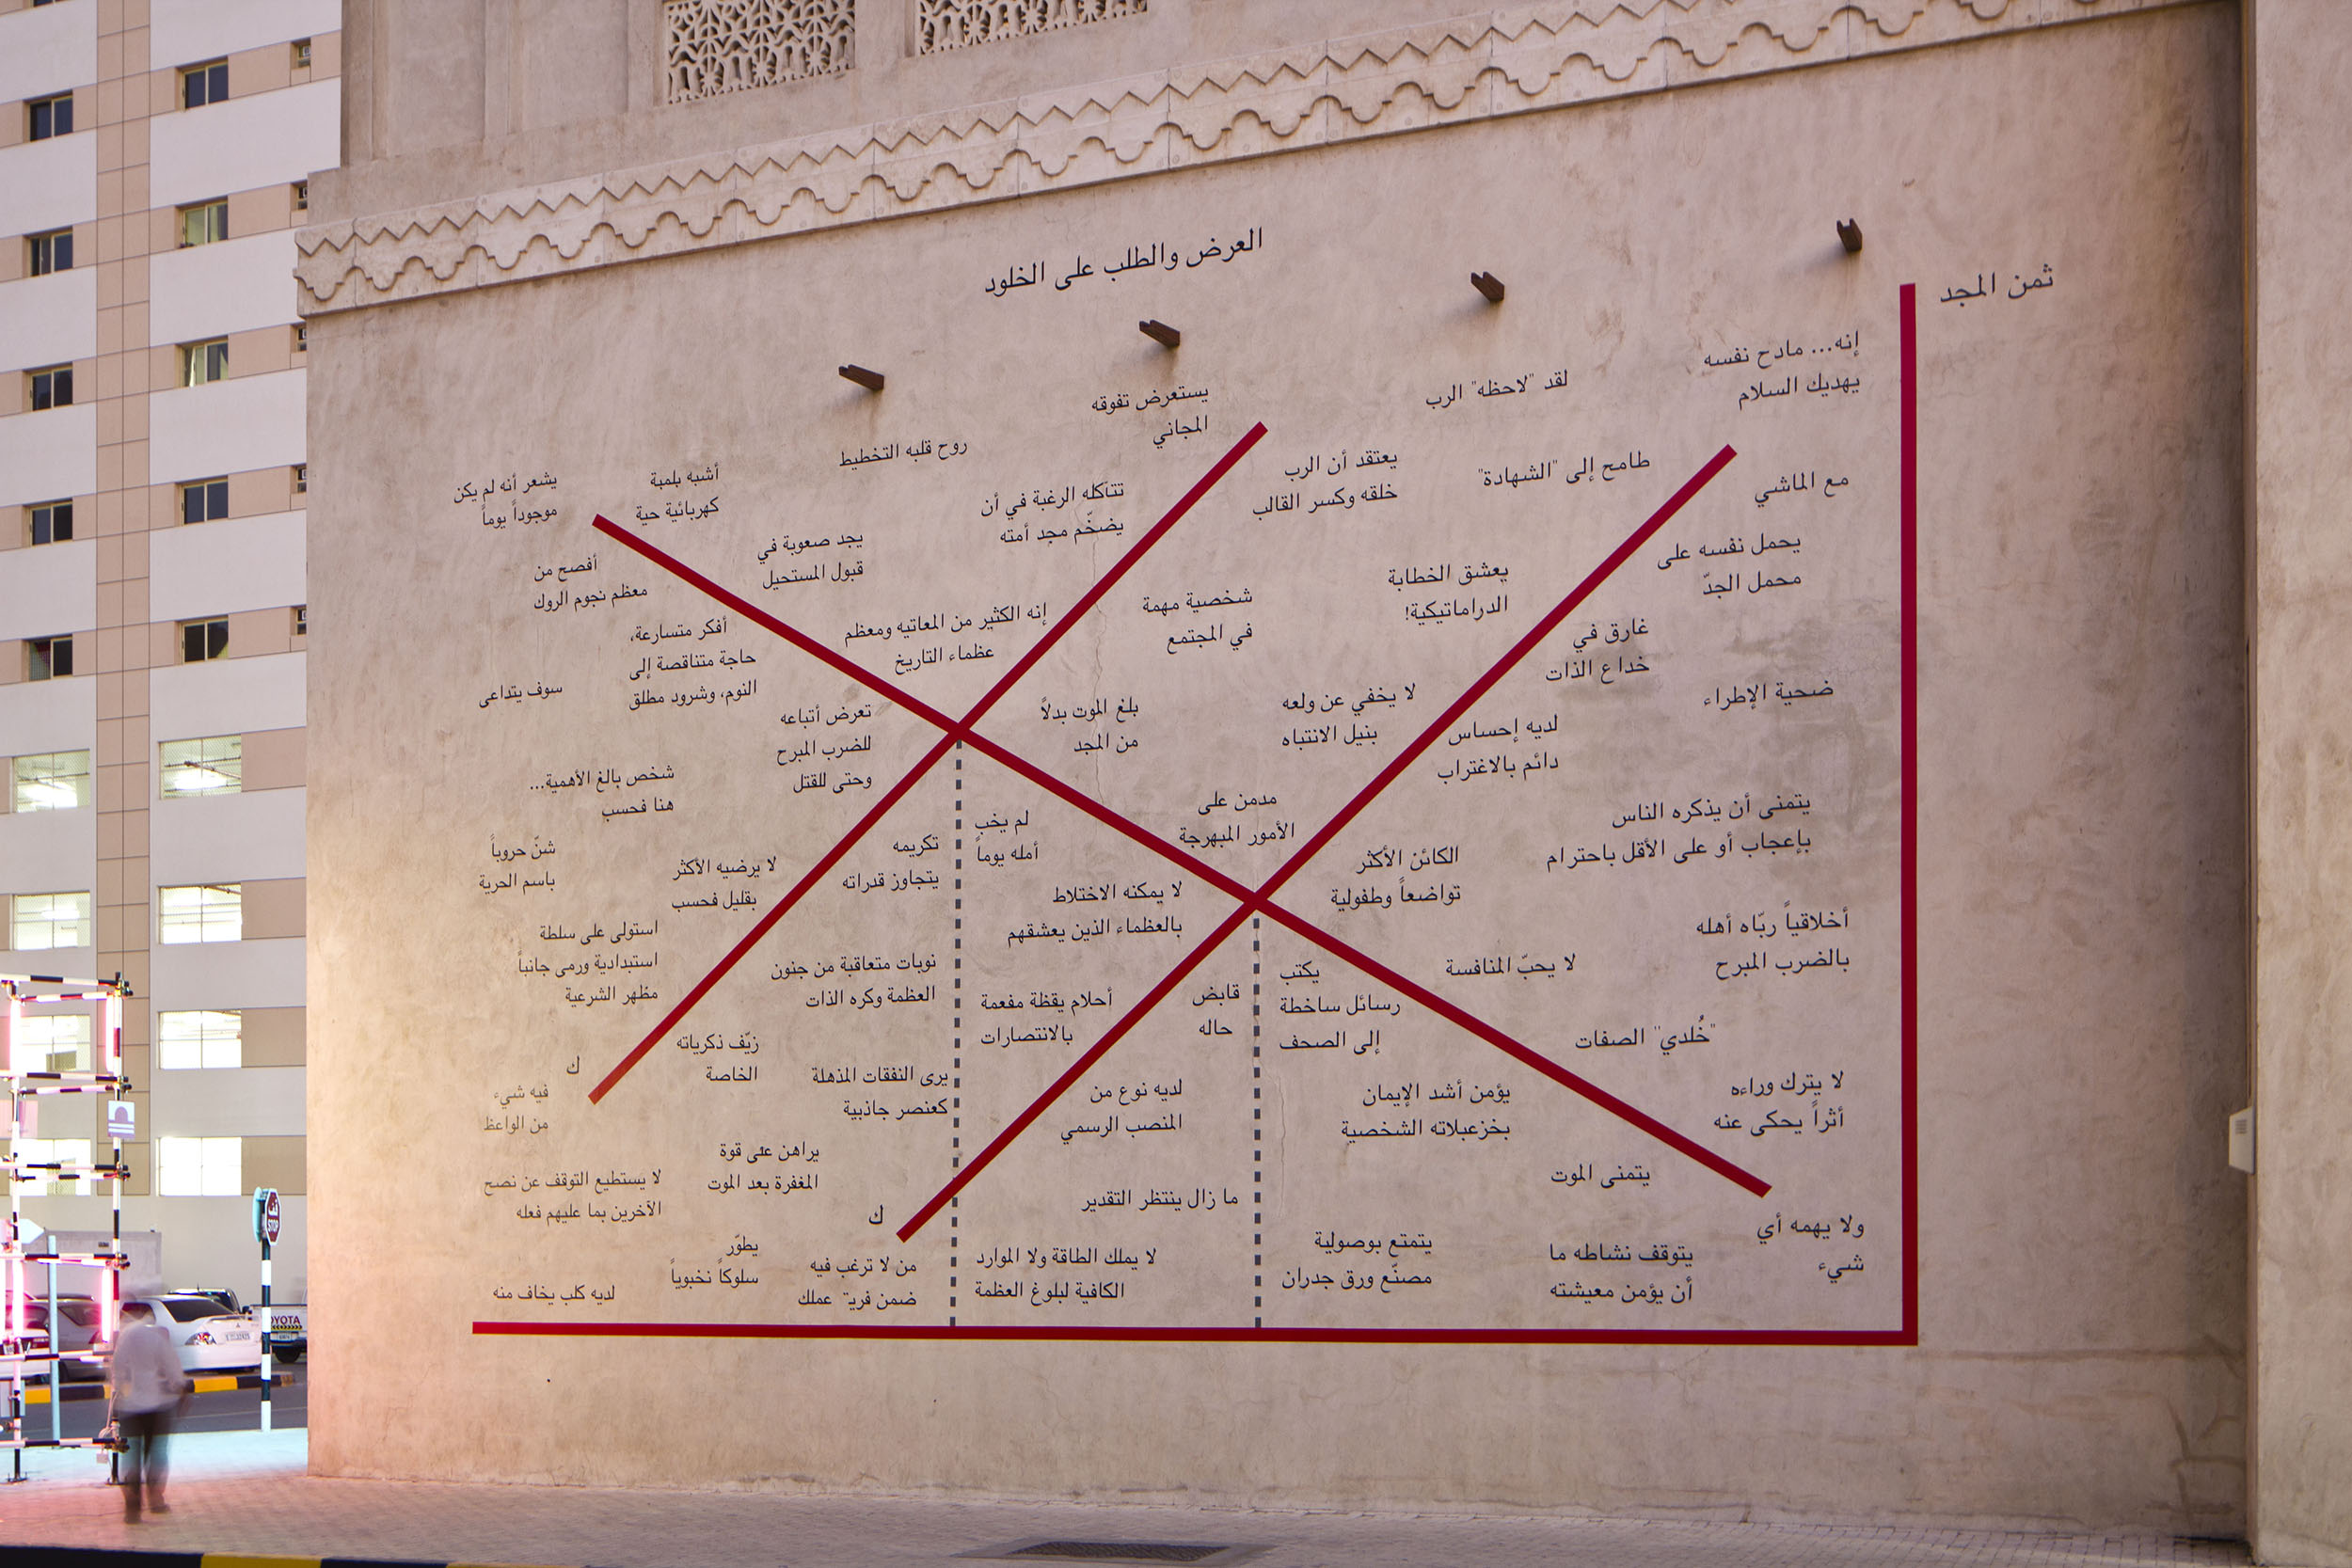 Richard Ibghy & Marilou Lemmens, ''Supply and Demand for Immortality,'' 2011. Two murals. 9.5 m x 15 m each. Installation view at the Sharjah Art Museum. 10th Sharjah Art Biennial, Sharjah, UAE, 2011. Commissioned by the Sharjah Art Foundation. Photo: Richard Ibghy & Marilou Lemmens